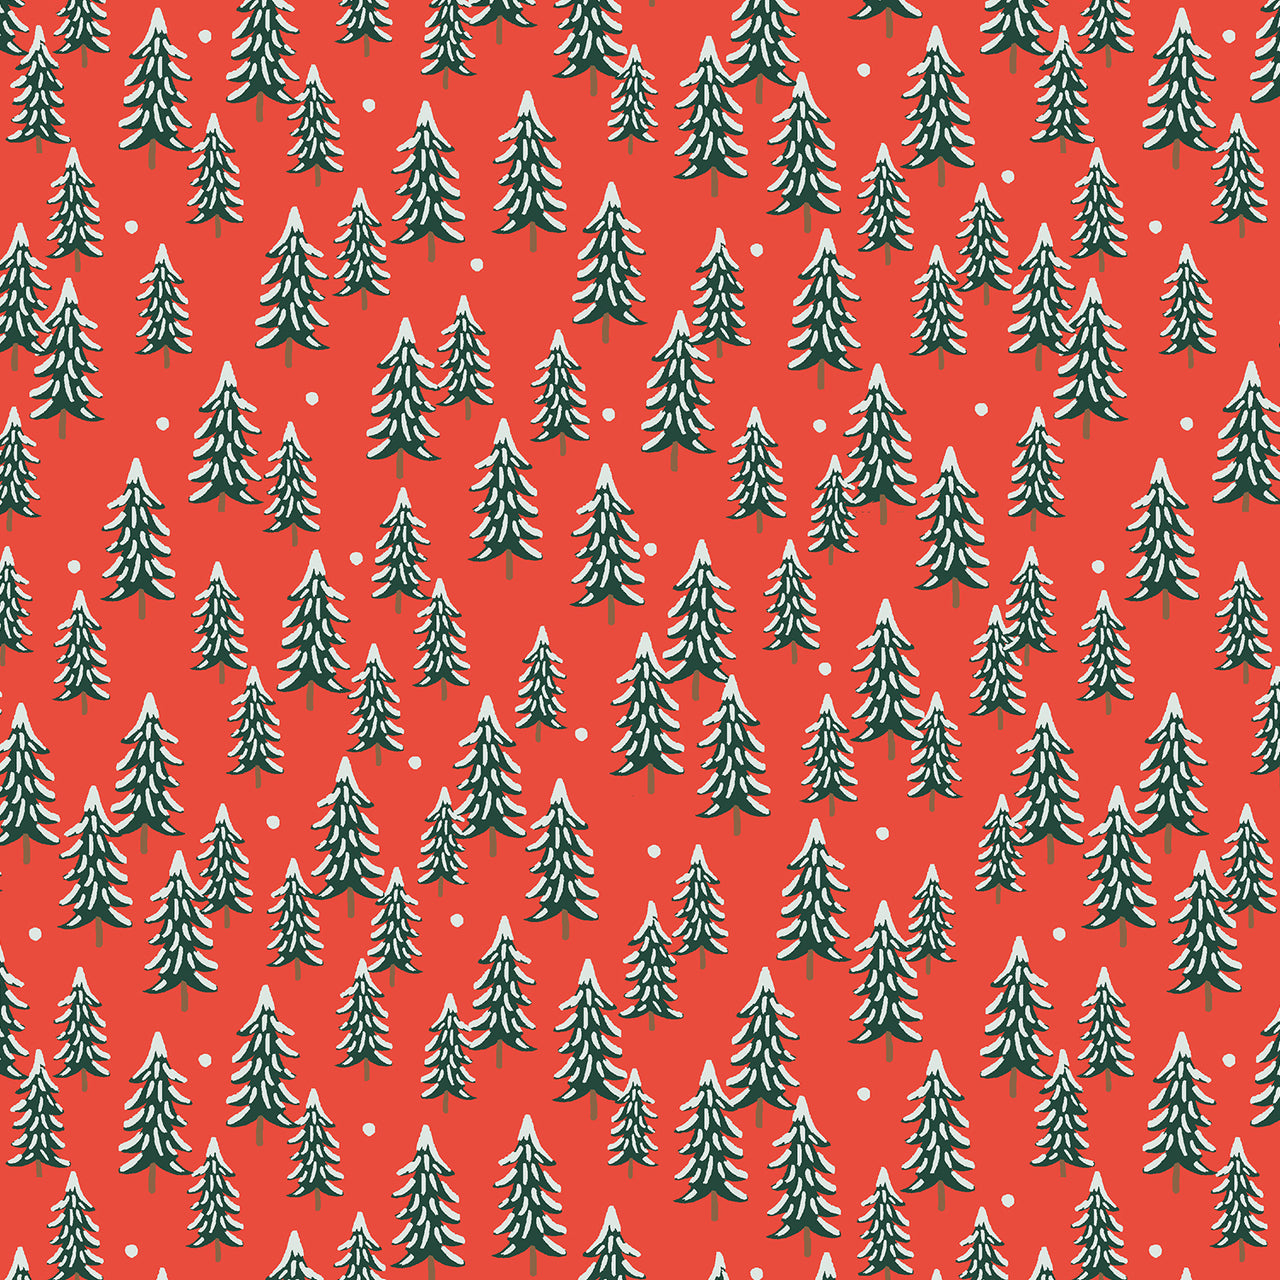 Holiday Classics by Rifle Paper Co : Fir Trees in Red : Cotton and Steel